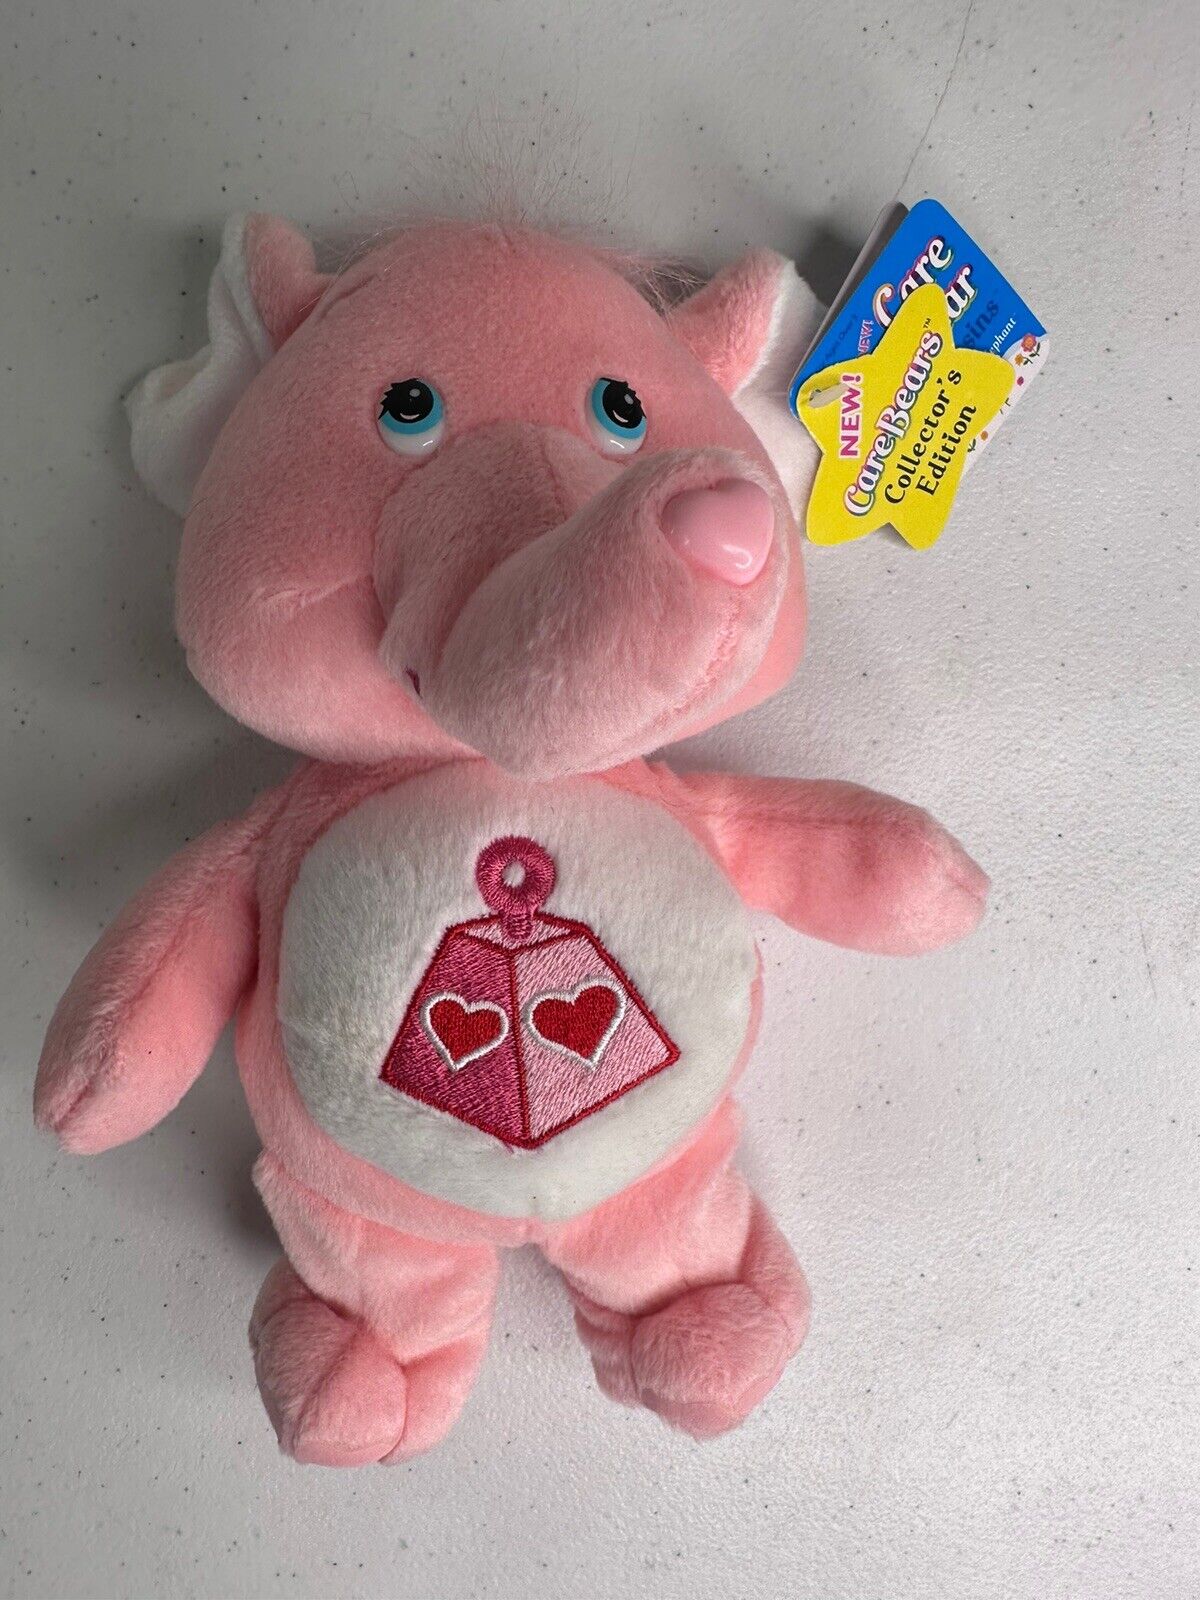 Lot of 2 Care Bears Collector's Edition 8" Tenderheart & Lotsa Heart Plush - New with Tags - TreasuTiques